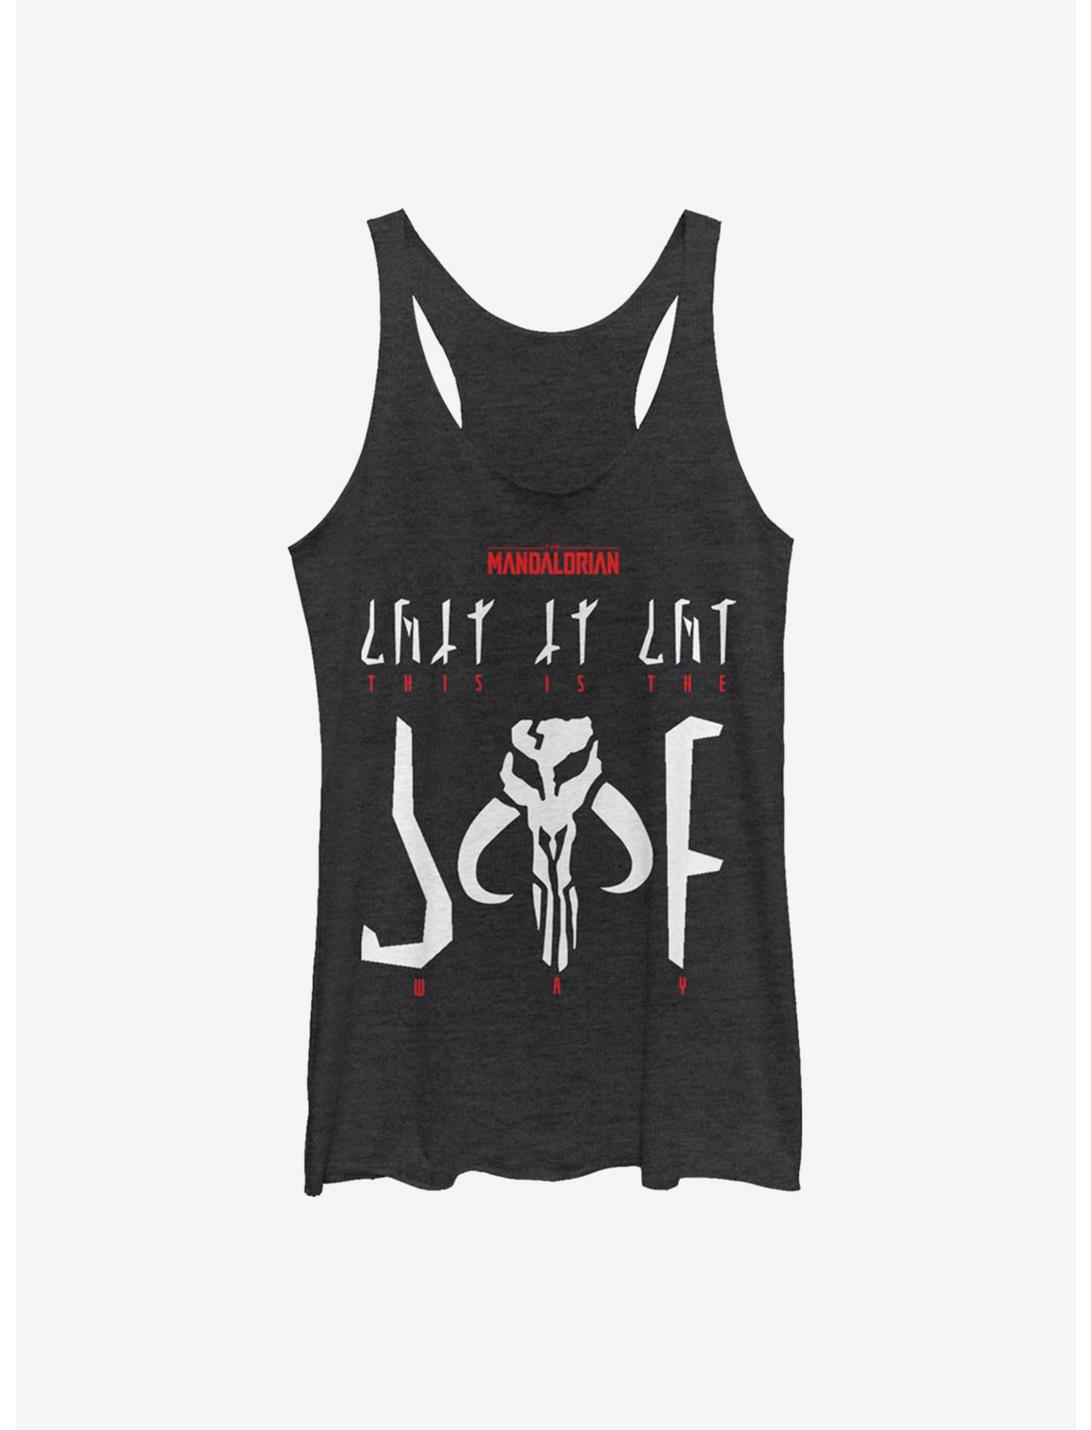 Star Wars The Mandalorian This Is The Way Logo Womens Tank Top, BLK HTR, hi-res